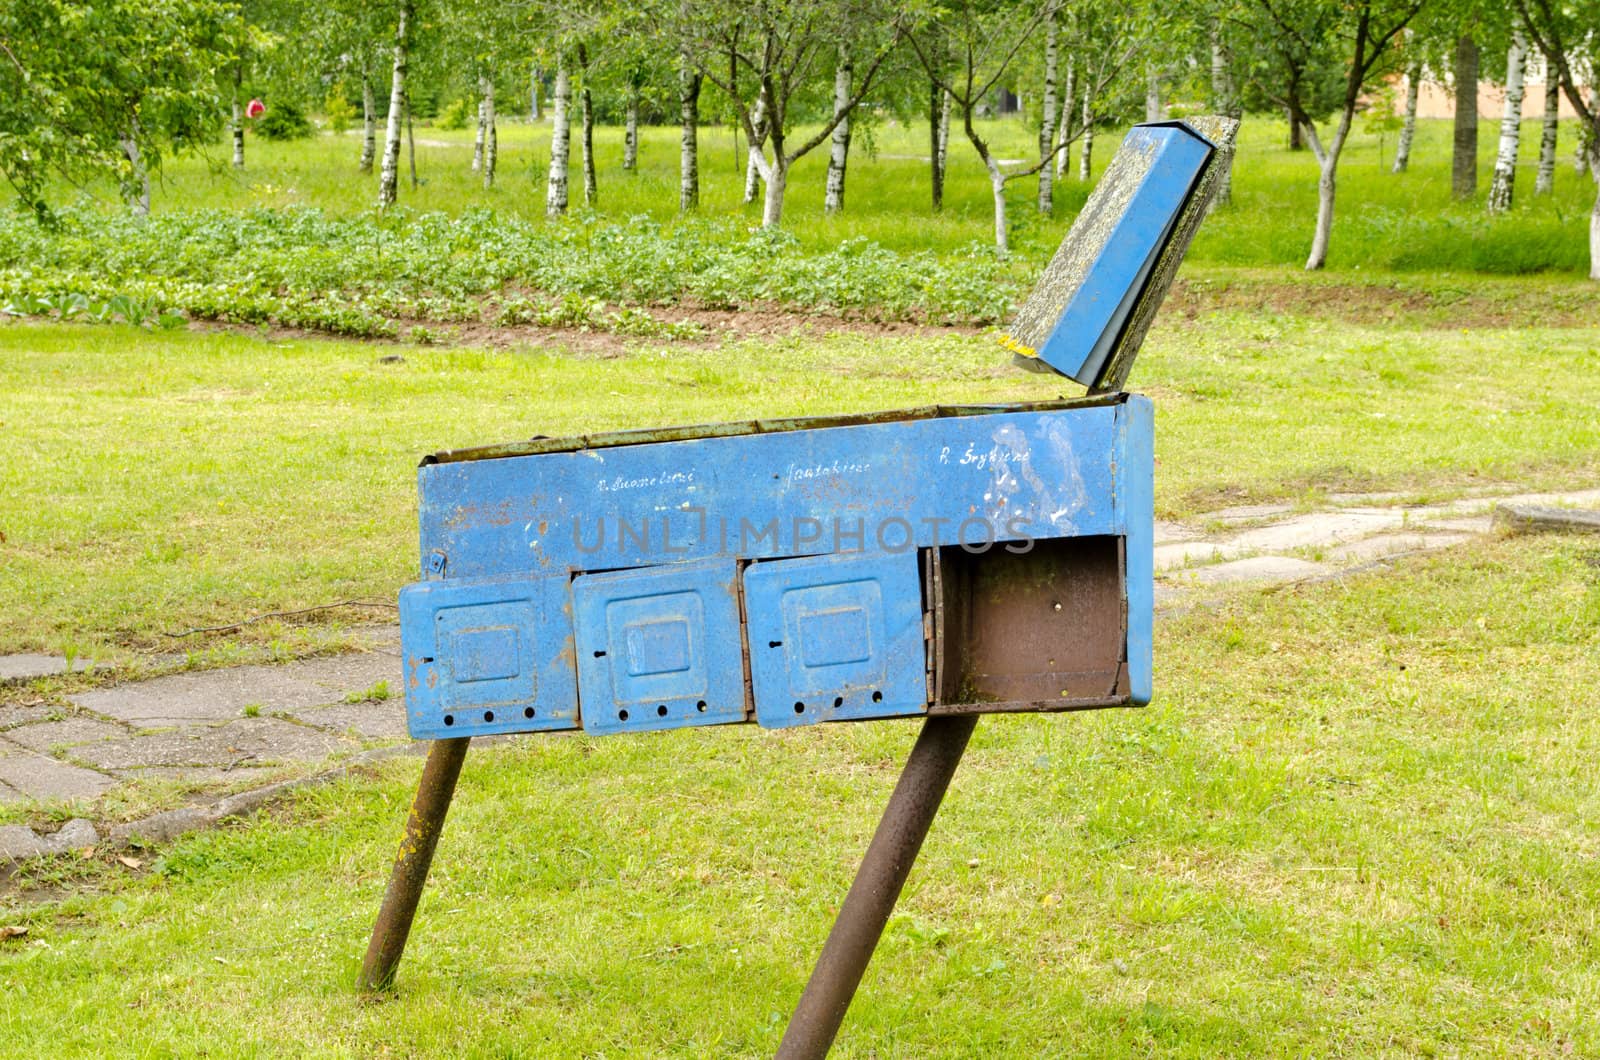 Retro blue rusty postbox with names on it and rural agricultural field and trees.